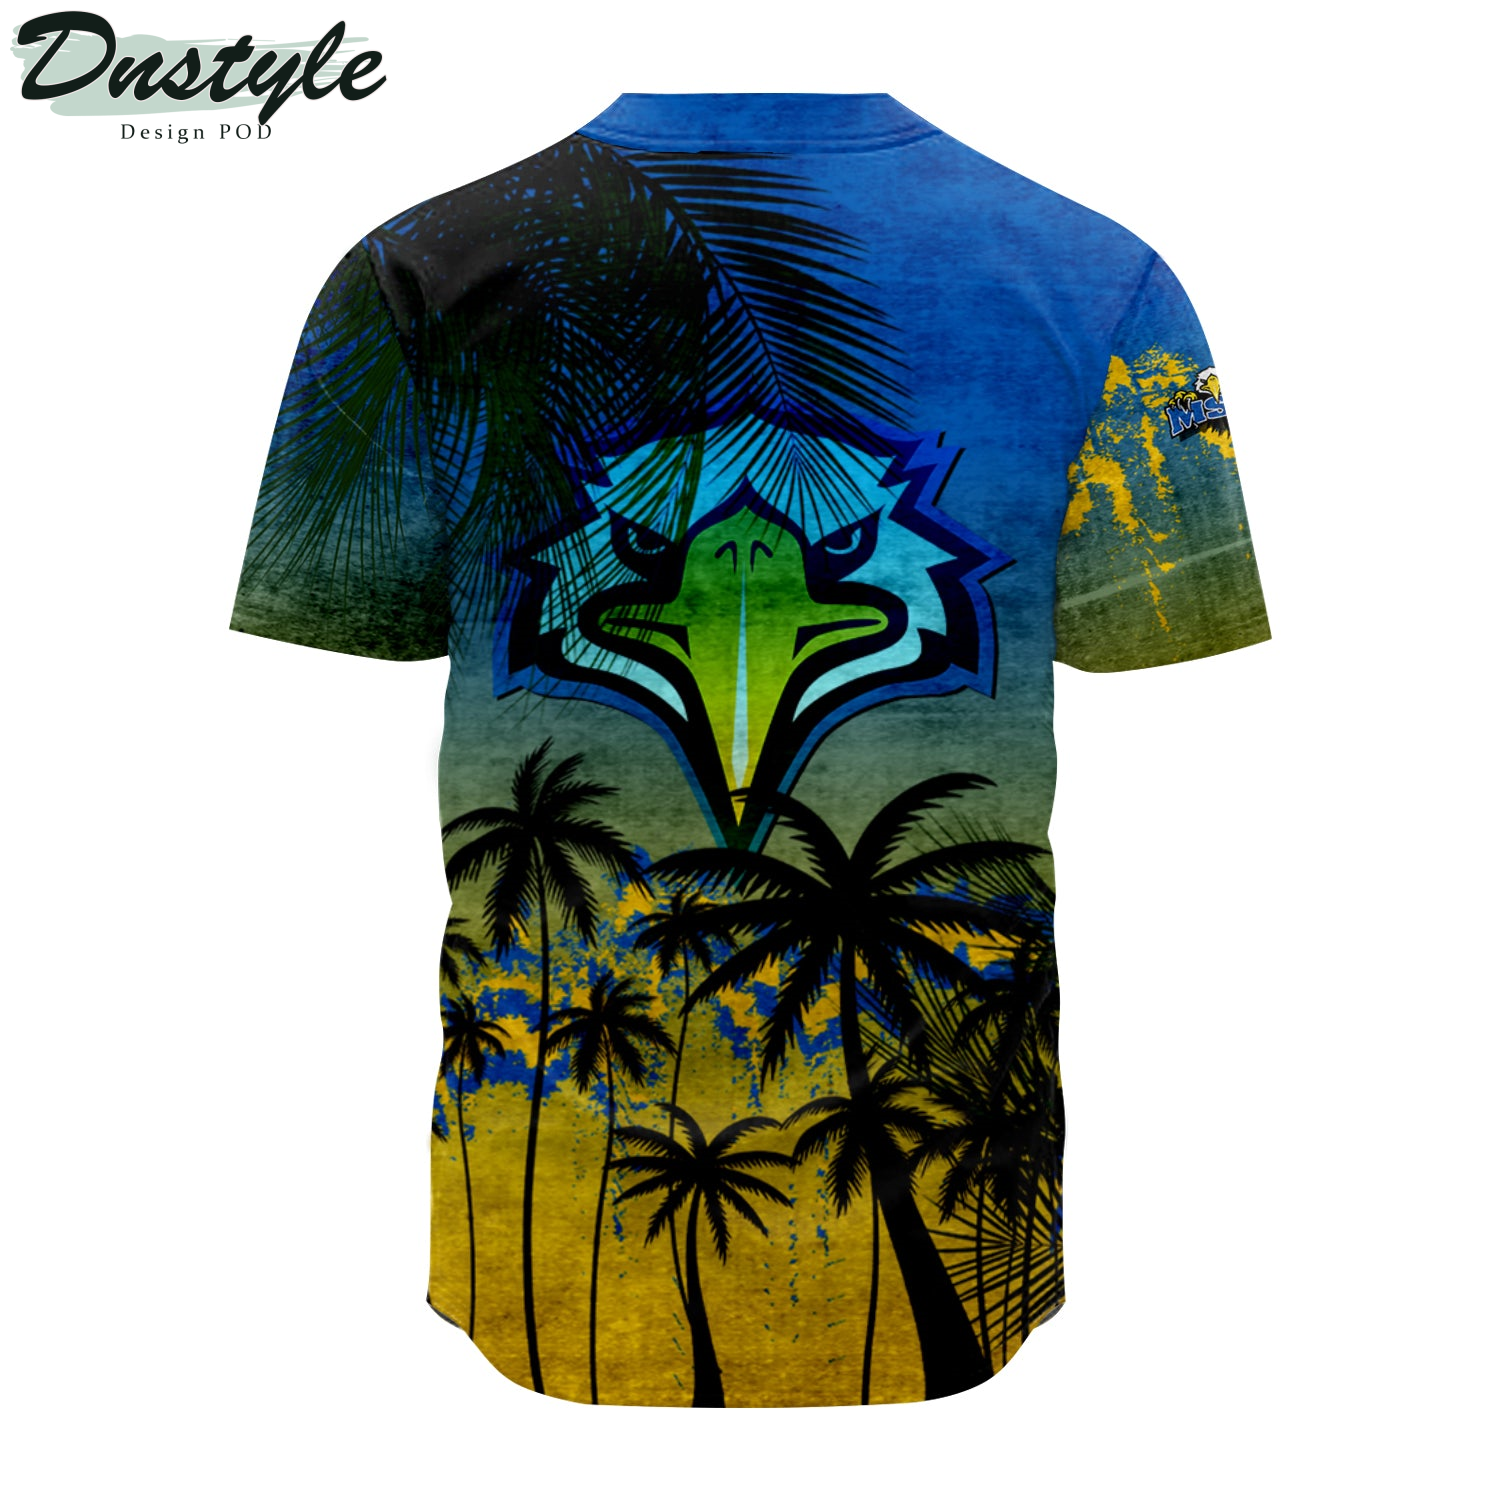 Morehead State Eagles Baseball Jersey Coconut Tree Tropical Grunge